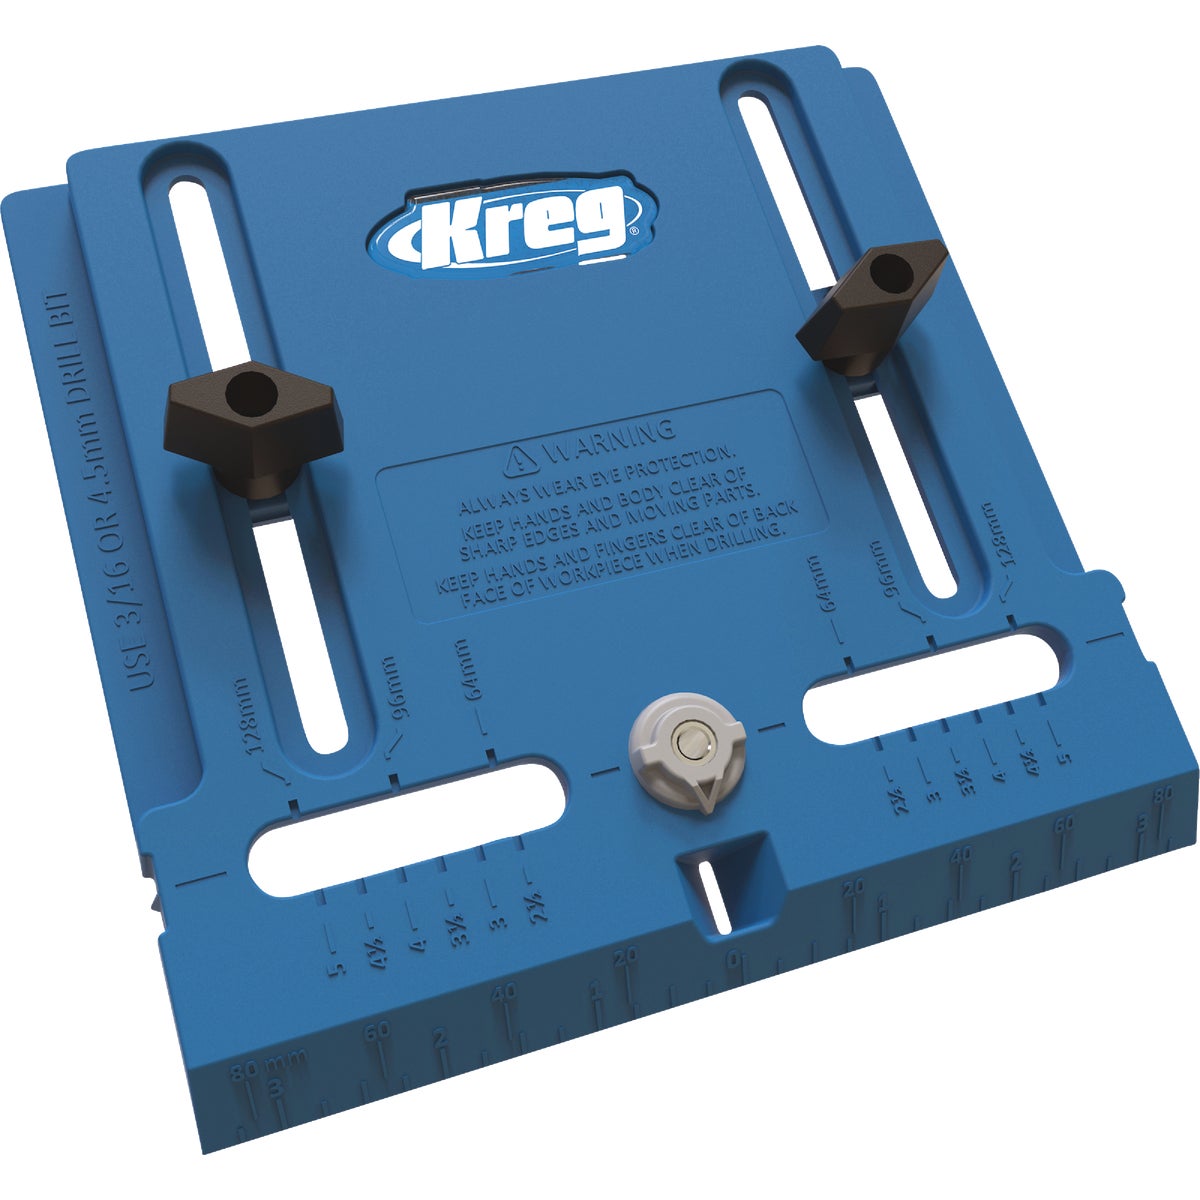 Item 367329, The Kreg Cabinet Hardware Jig takes the guesswork out of installing cabinet